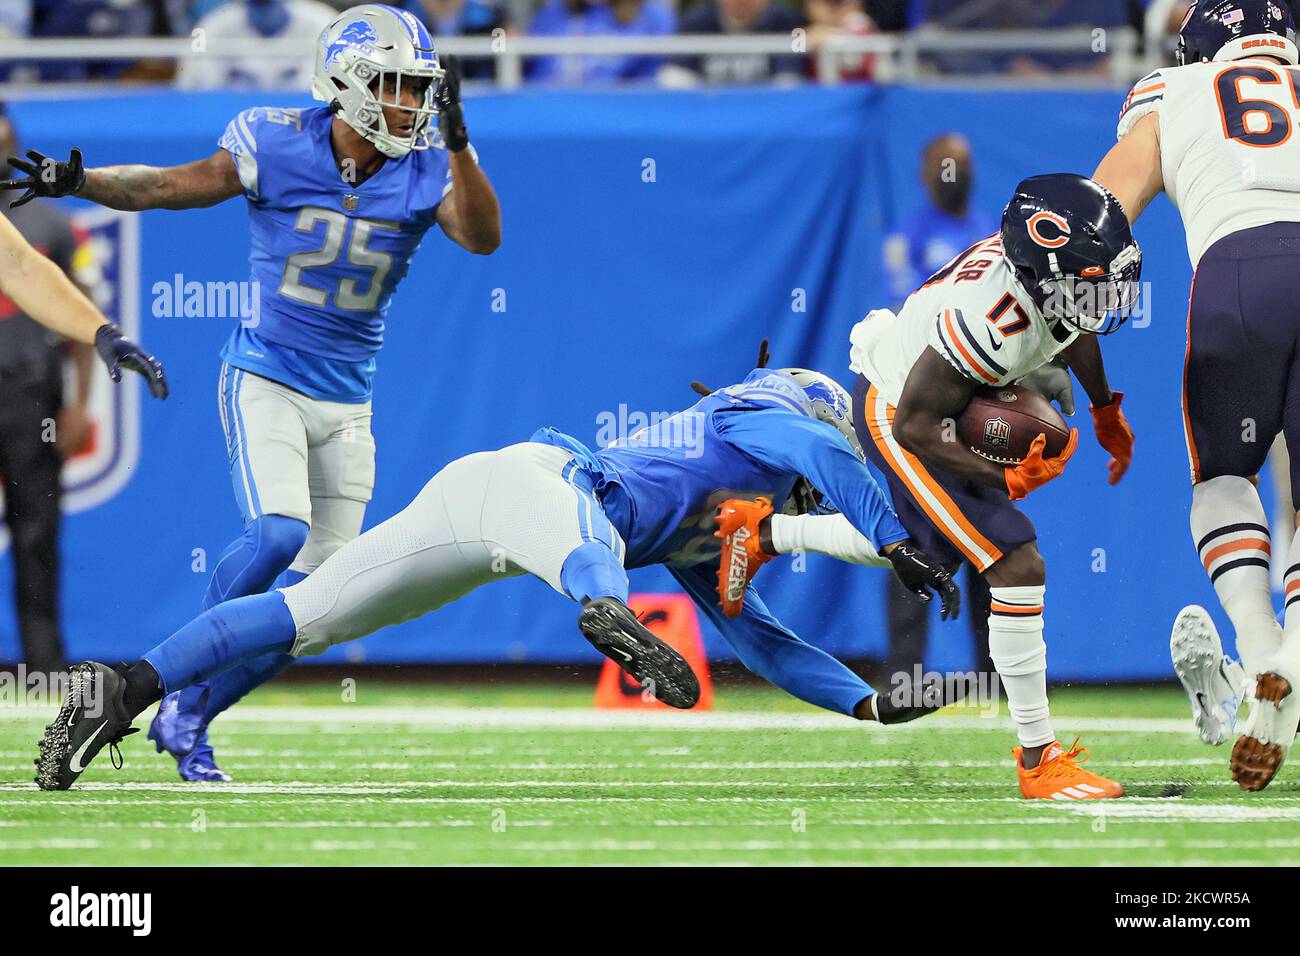 Chicago Bears wide receiver Jakeem Grant (17) runs with the ball during an NFL football game between the Detroit Lions and the Chicago Bears in Detroit, Michigan USA, on Thursday, November 25, 2021. (Photo by Amy Lemus/NurPhoto) Stock Photo